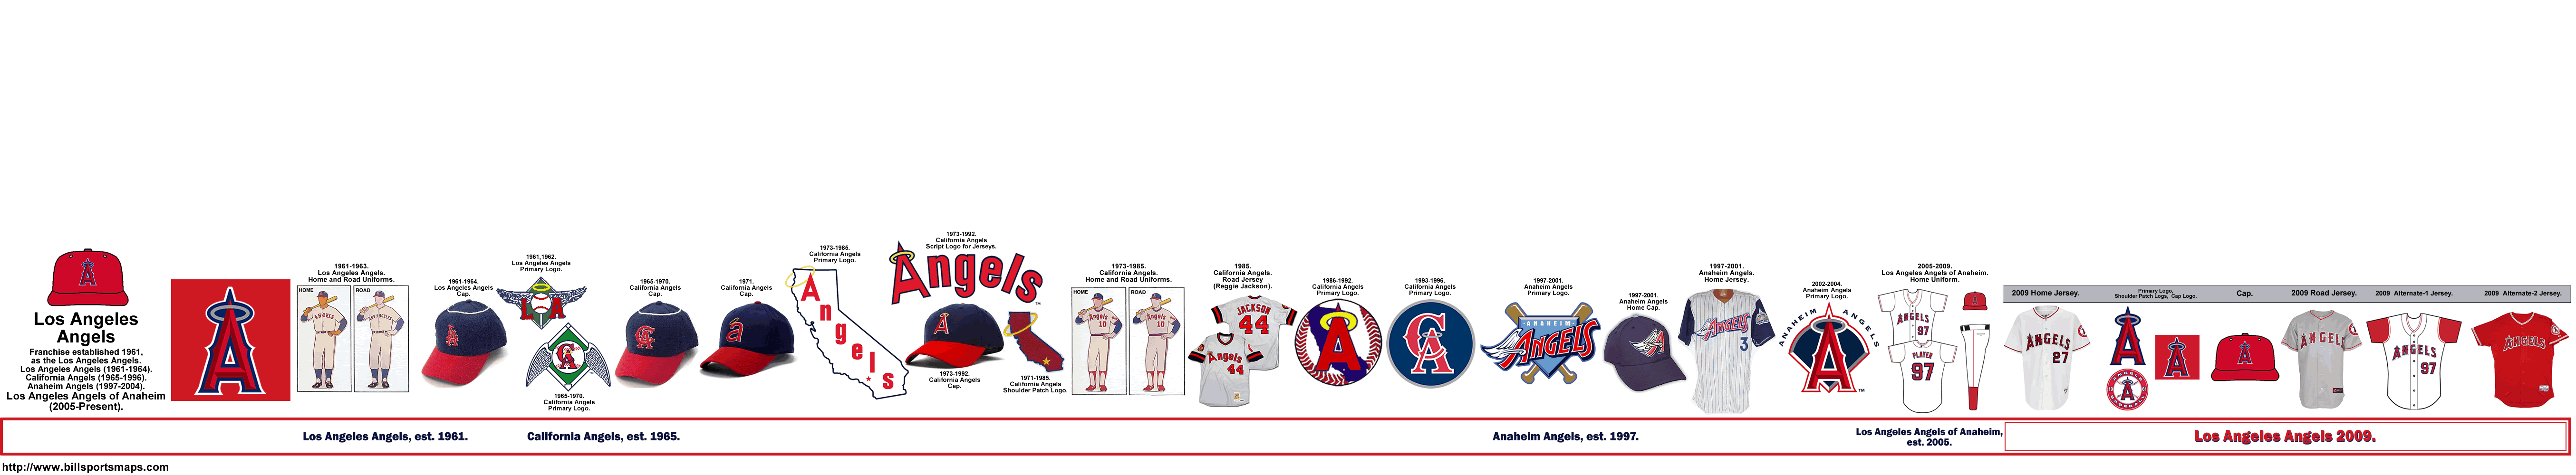 los-angeles_angels_auxillary-chart2009_e.gif